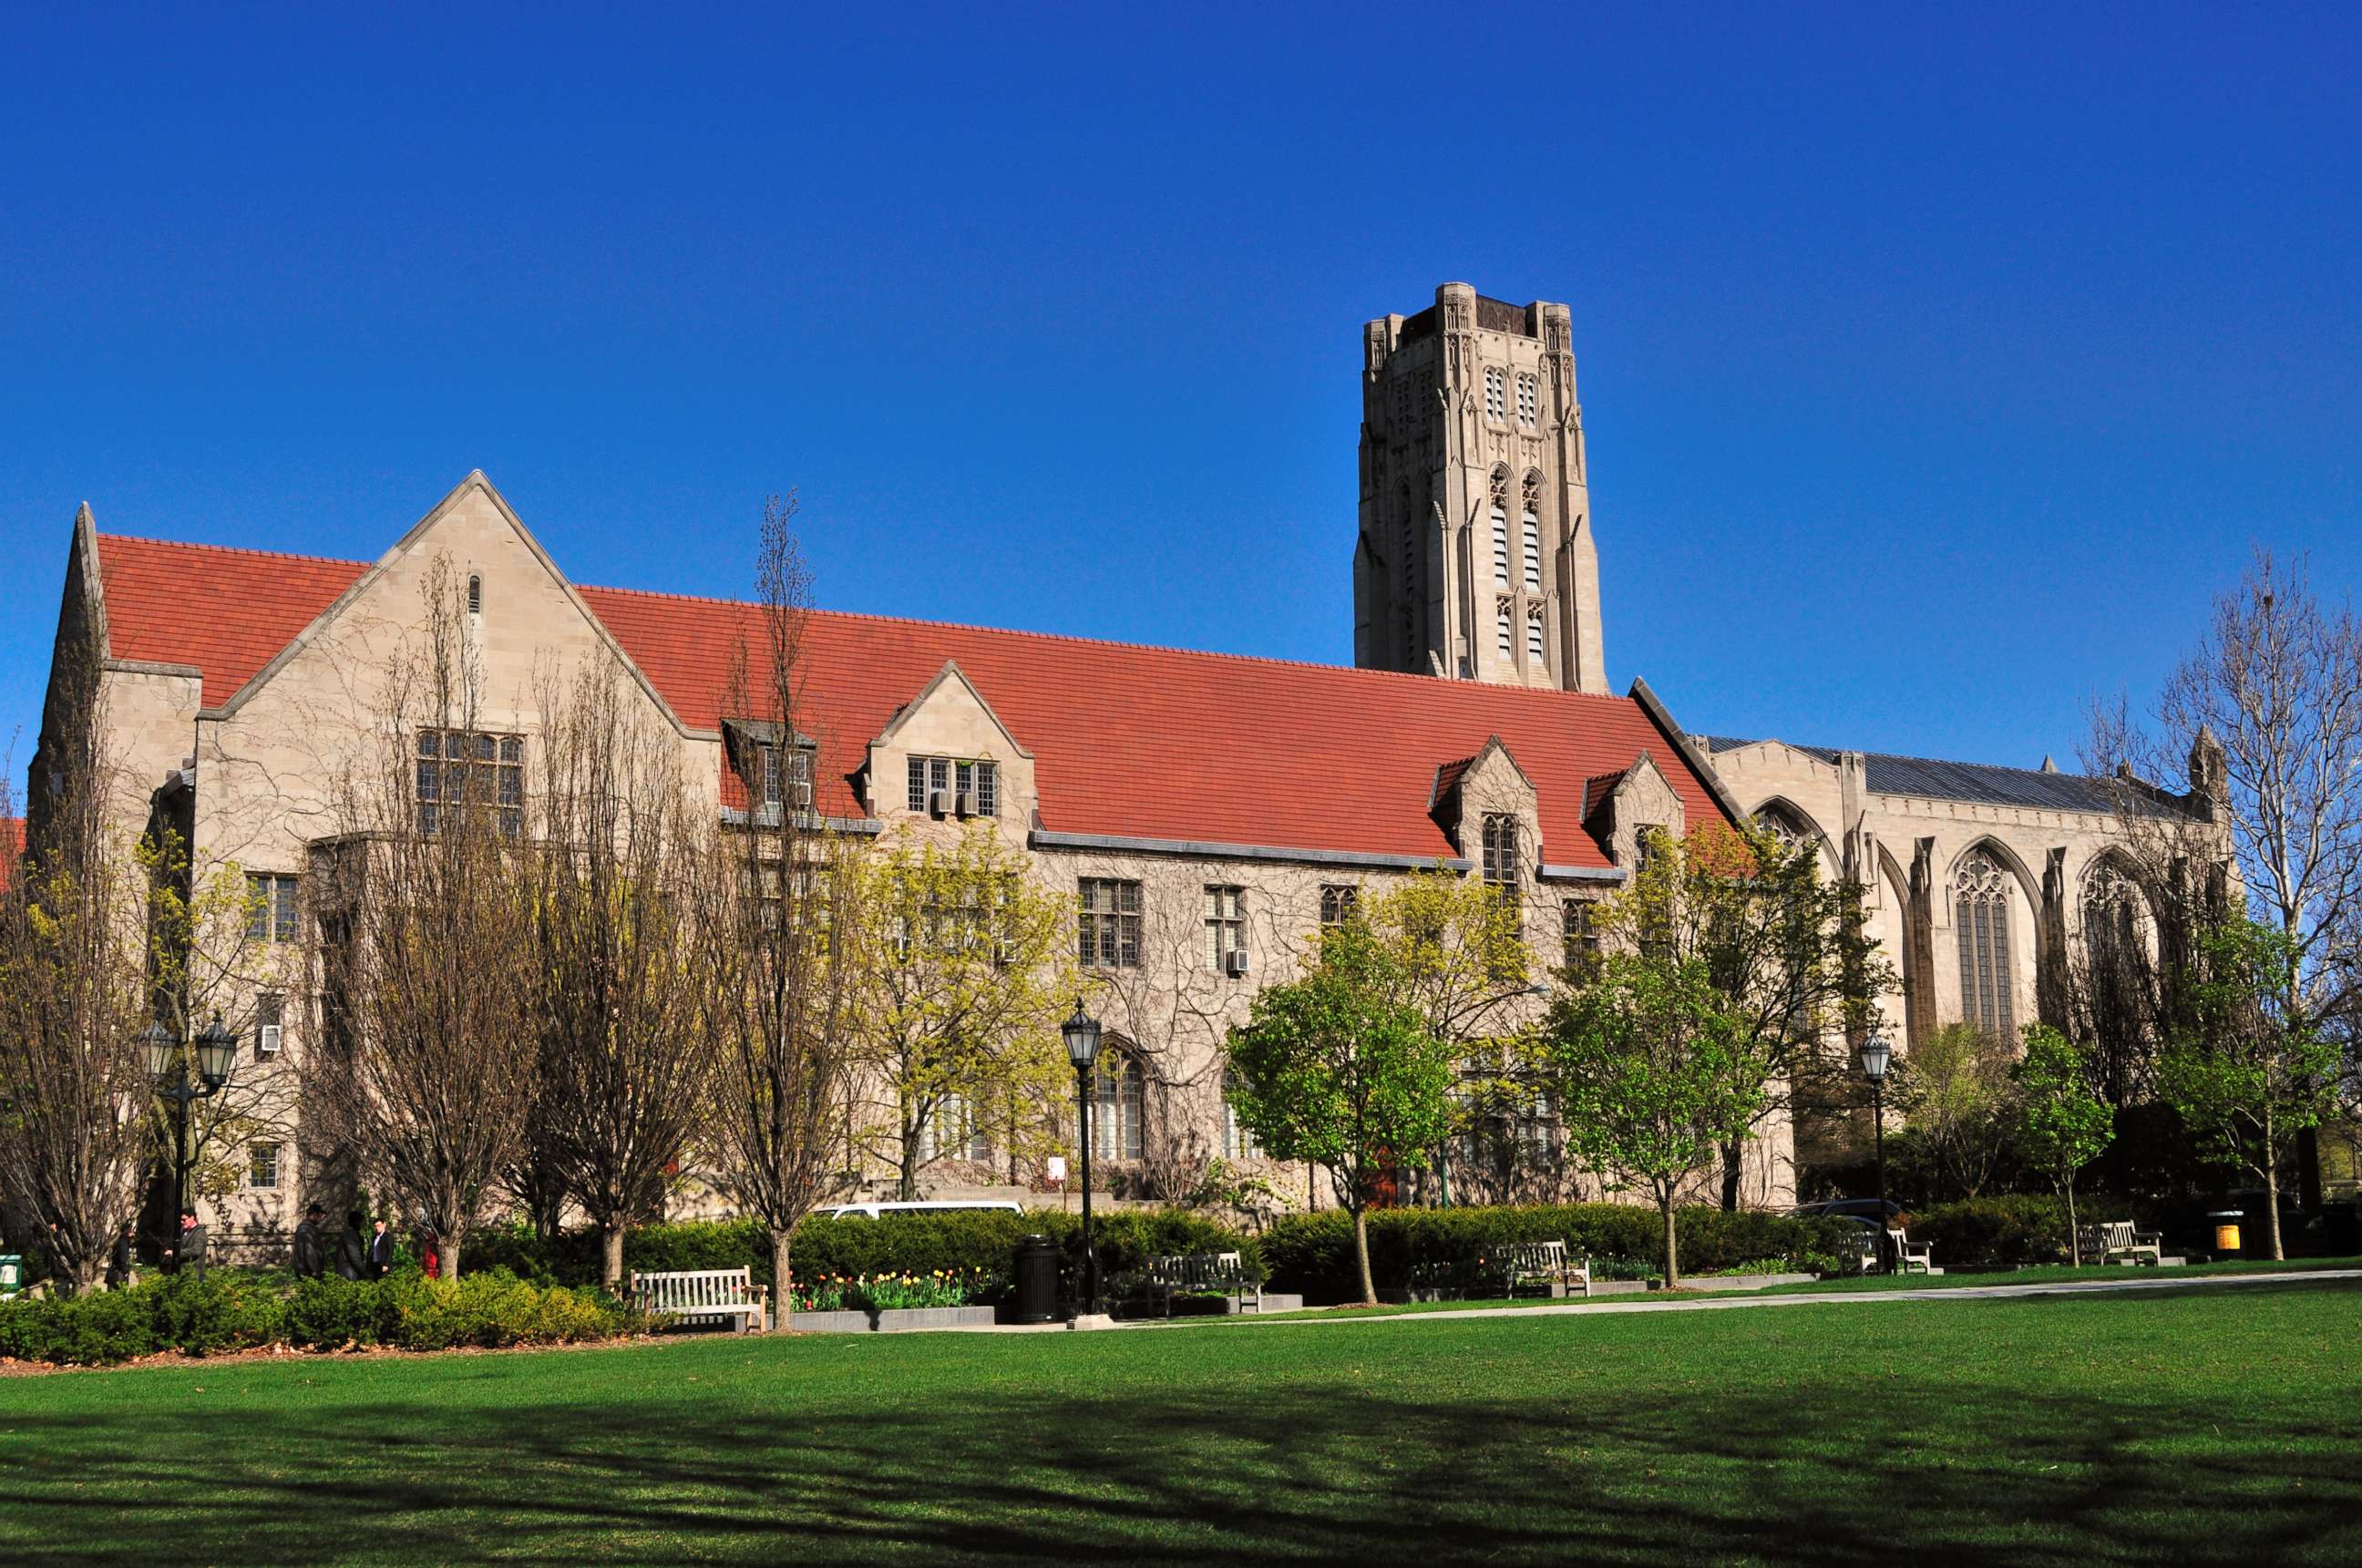 PHOTO: The campus of the University of Chicago is pictured in this undated stock photo.